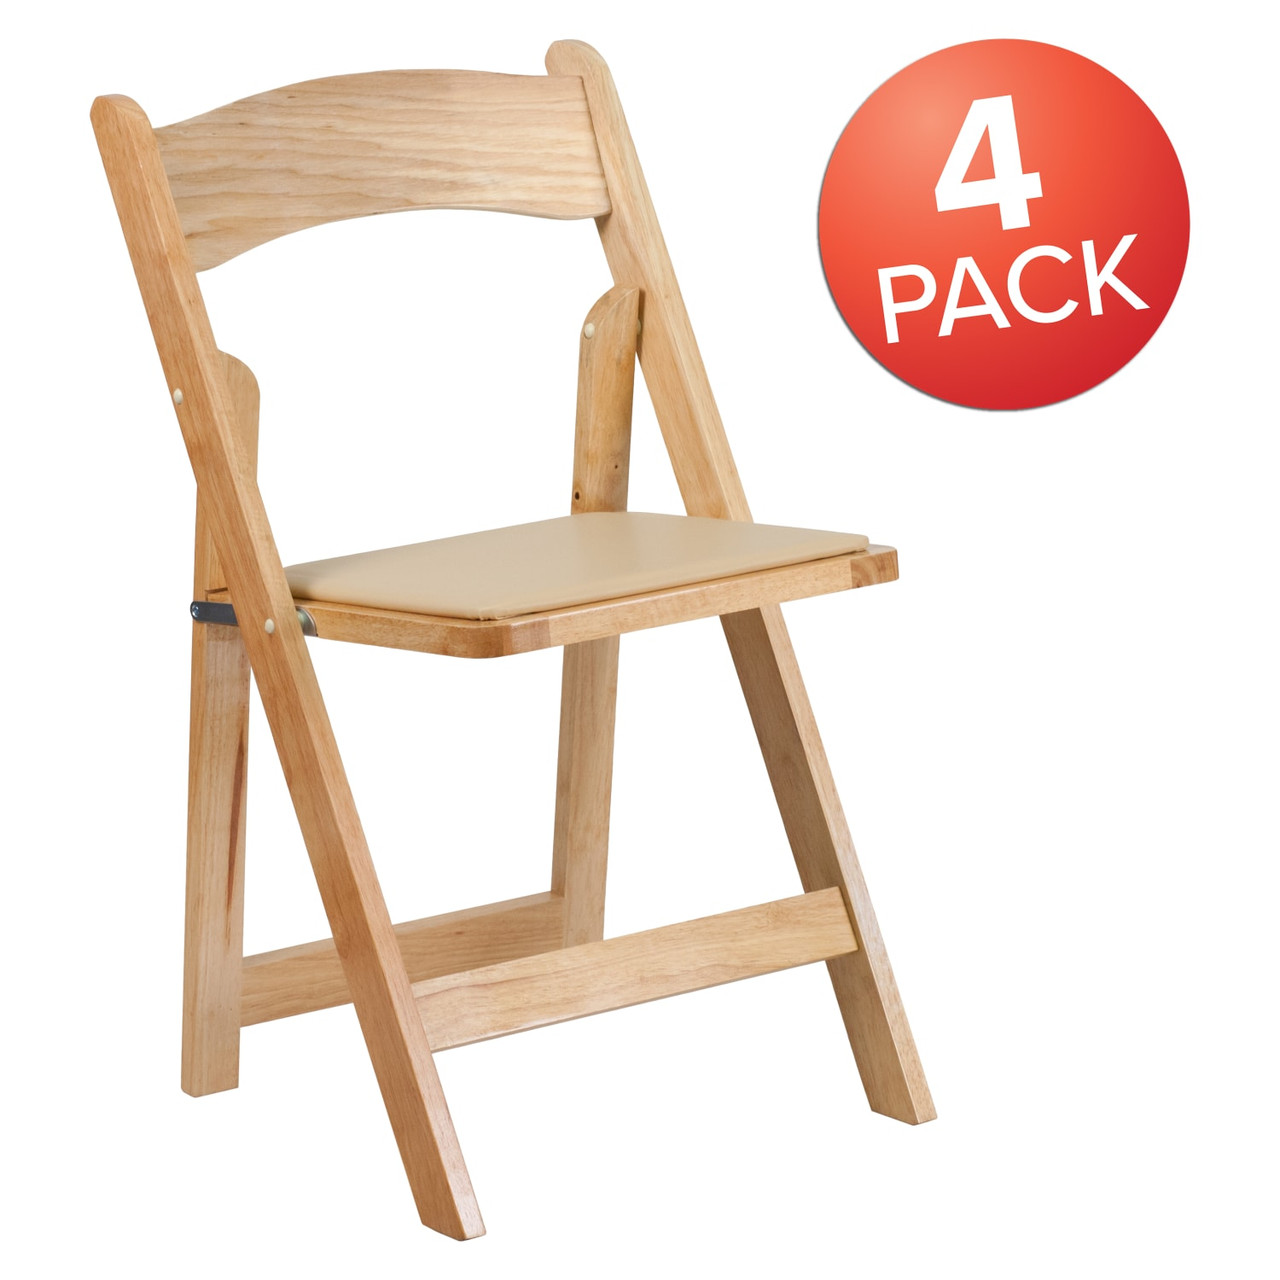 4 Pack Hercules  Series Natural Wood Folding Chair with Vinyl Padded Seat